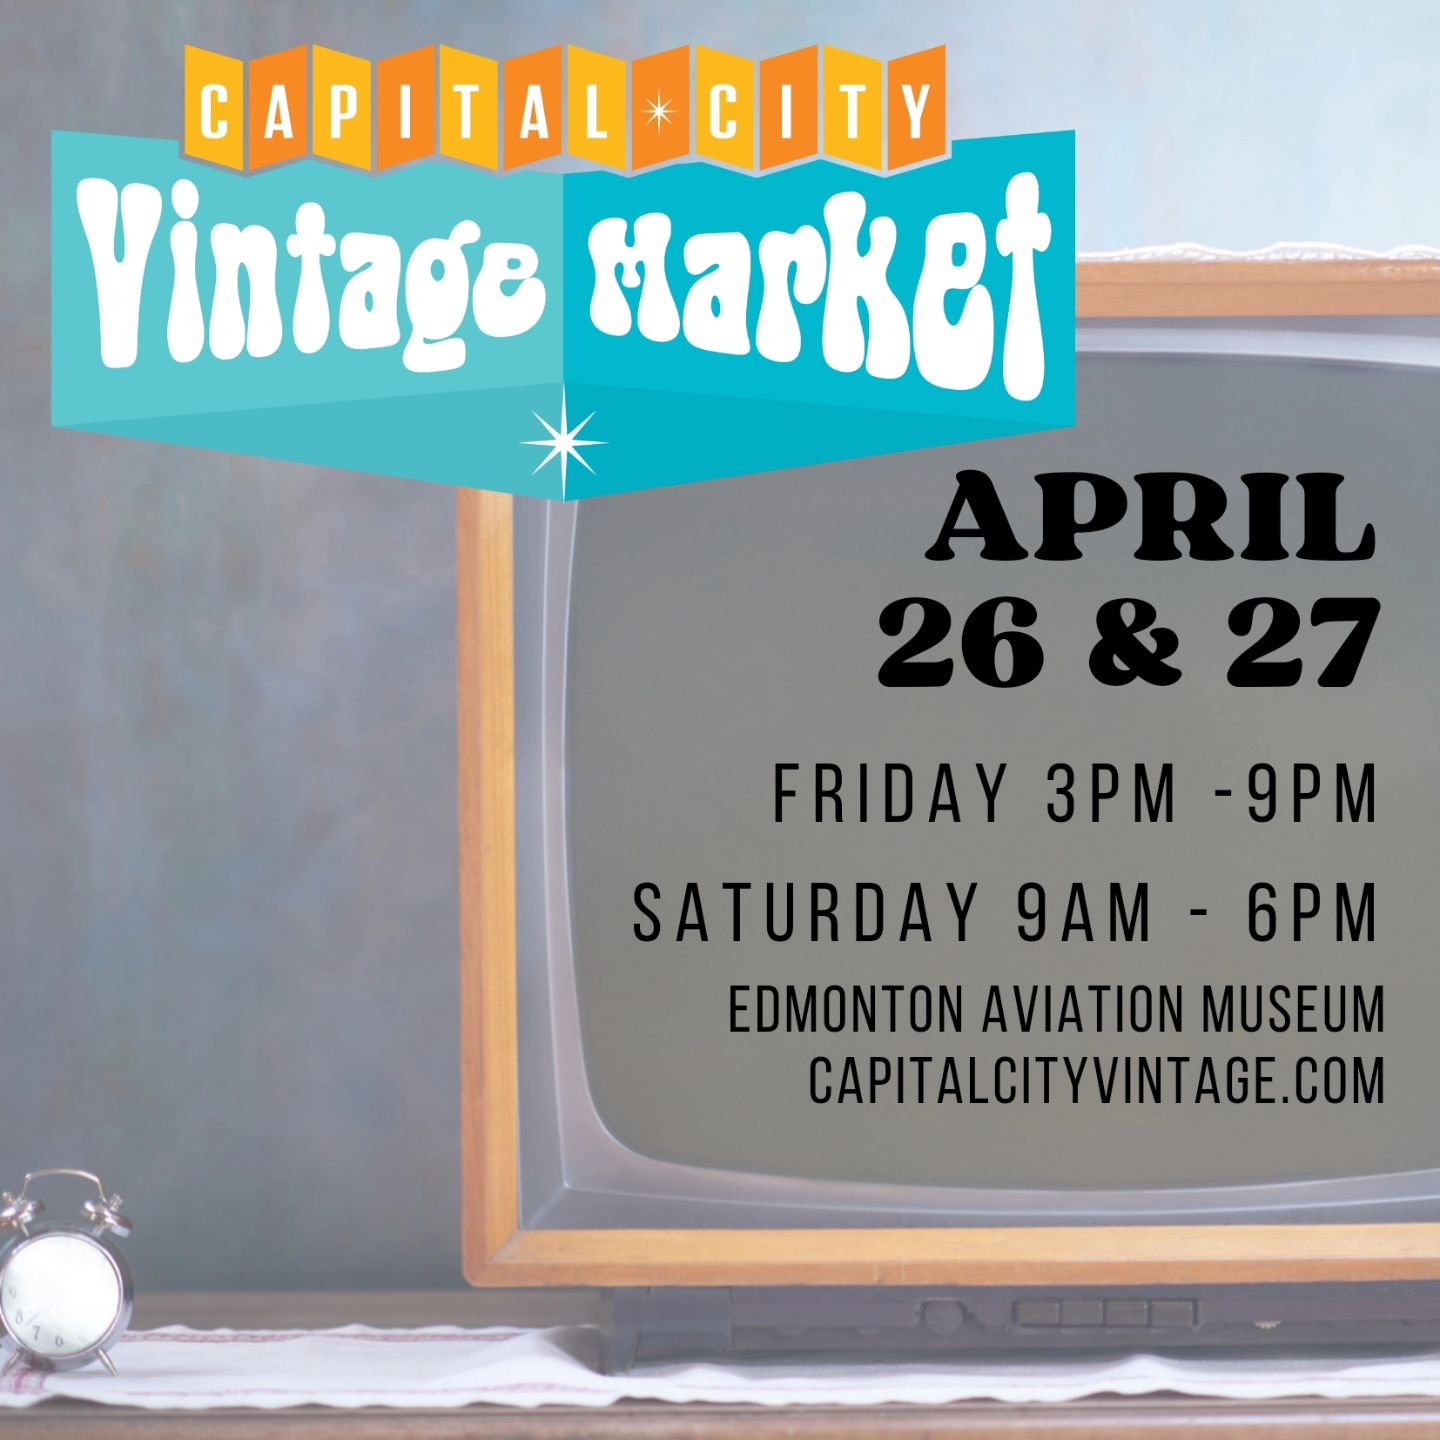 THIS FRIDAY! Over 50 Vintage Vendors

Edmonton (Alberta) Aviation Museum
11410 Kingsway nw, Edmonton 

Friday 3-9
Saturday 9-6
 
You will find a wide variety of vintage - new and second-hand goodies. Our market focuses on Vintage (1950-2000) clothing